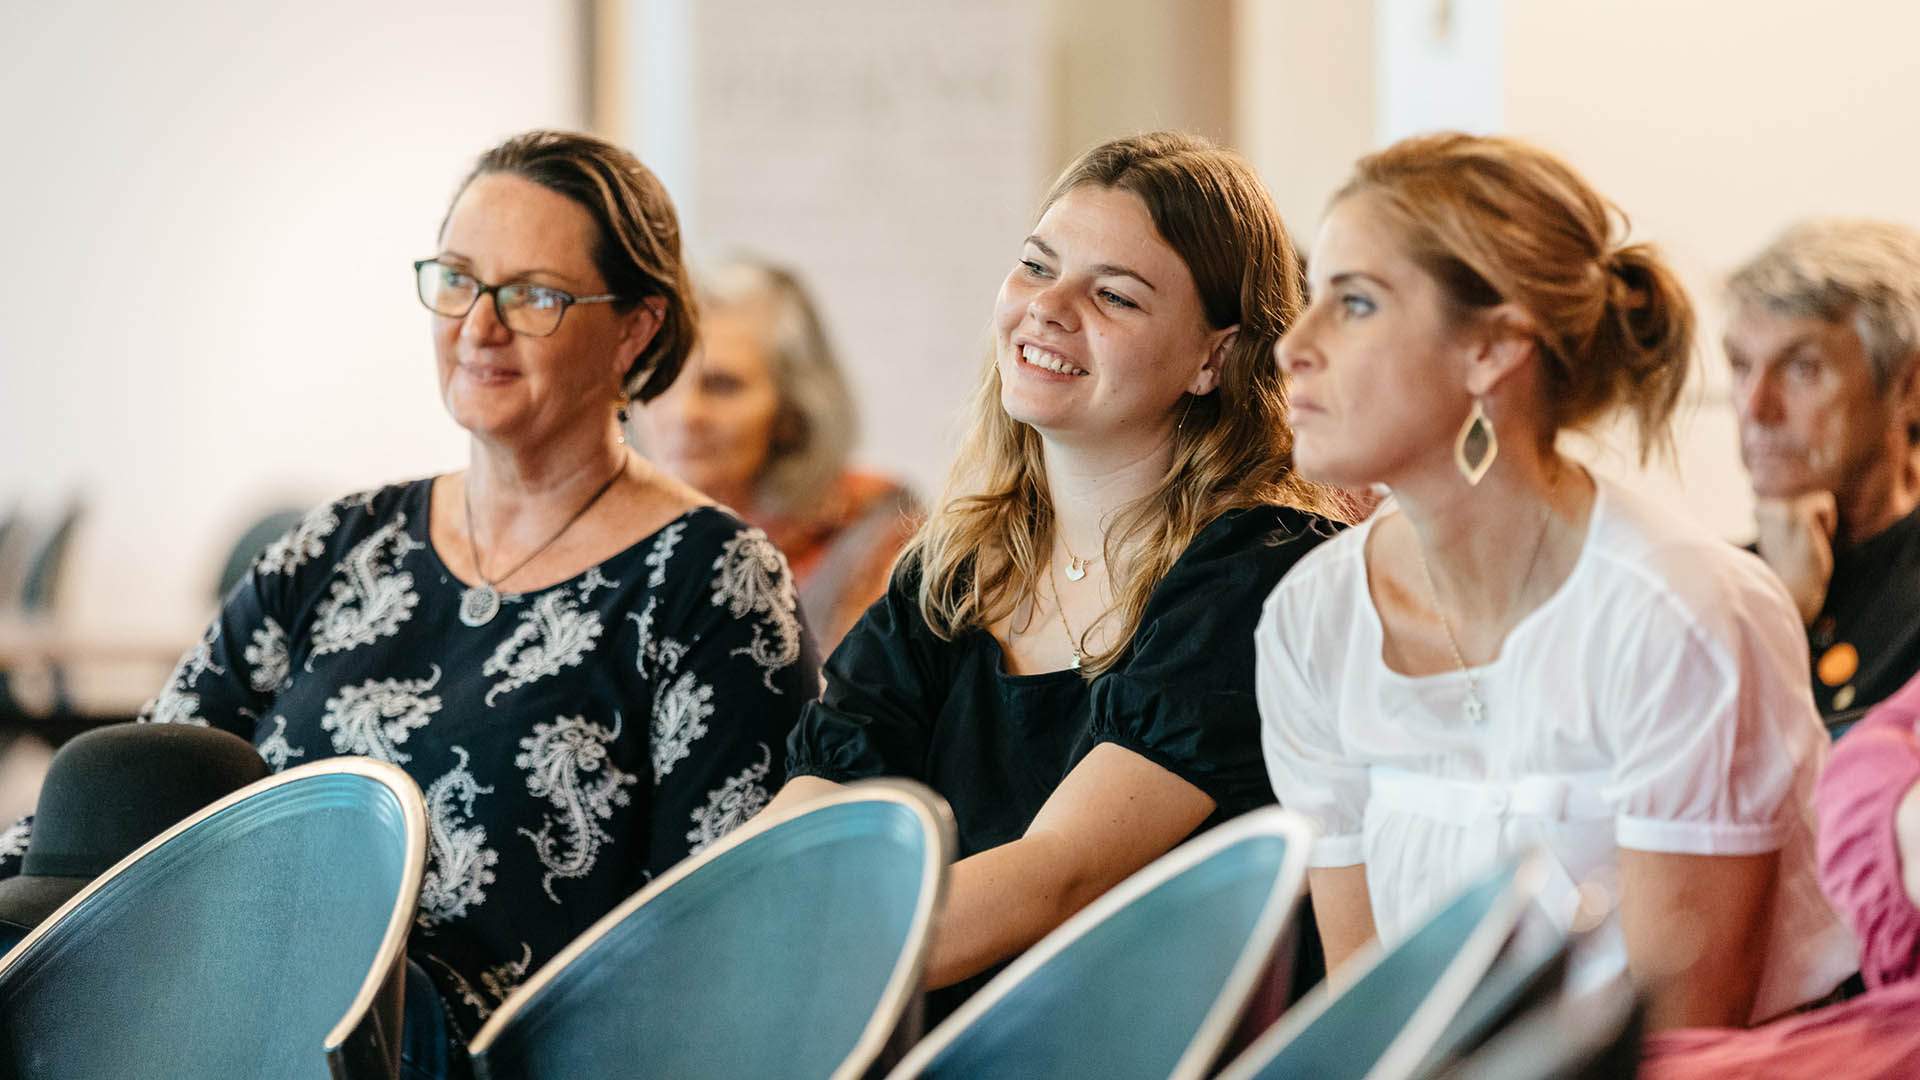 Brisbane Writers Festival's Stacked 2022 Program Features 200-Plus Events Spread Across the City